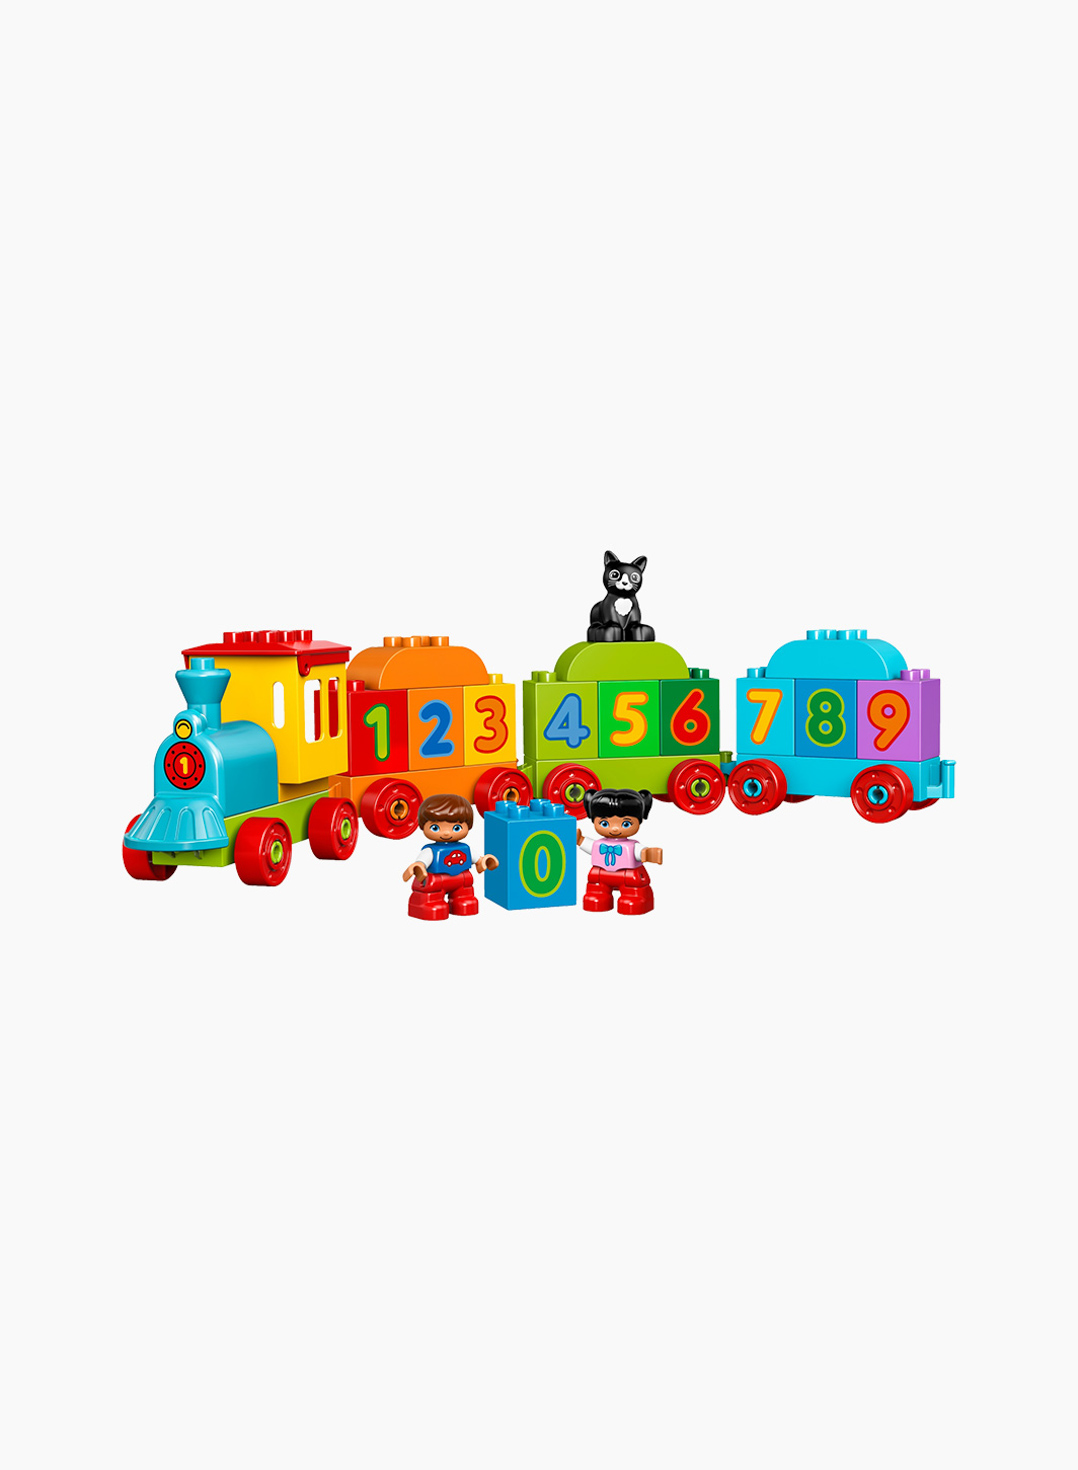 Lego Duplo Constructor Number Train